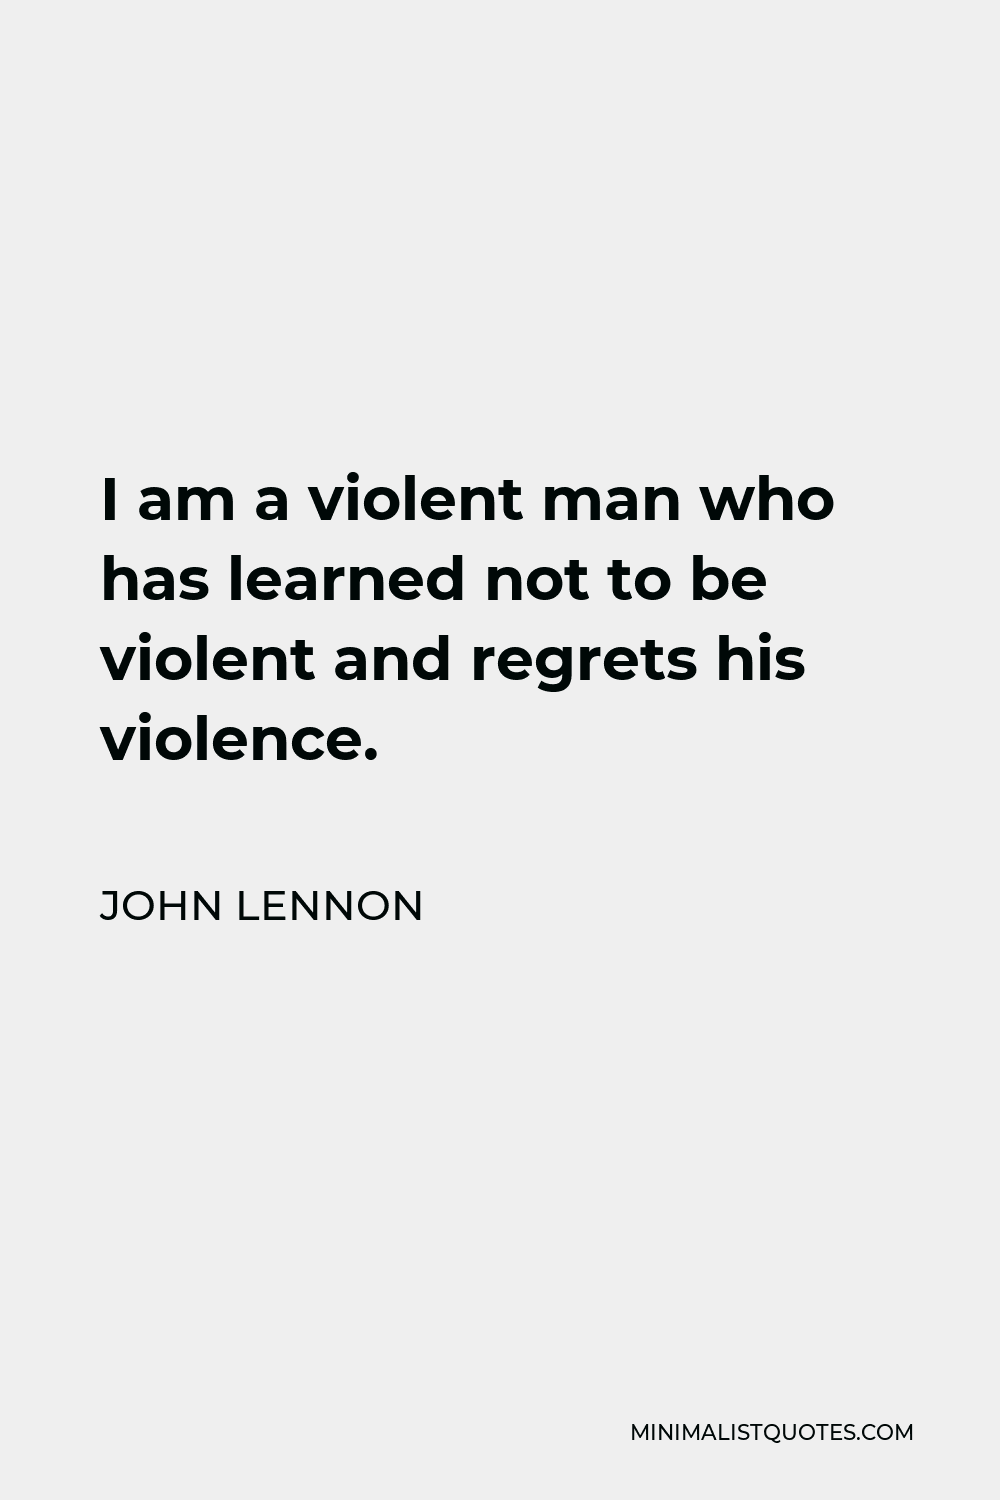 John Lennon Quote - I am a violent man who has learned not to be violent and regrets his violence.